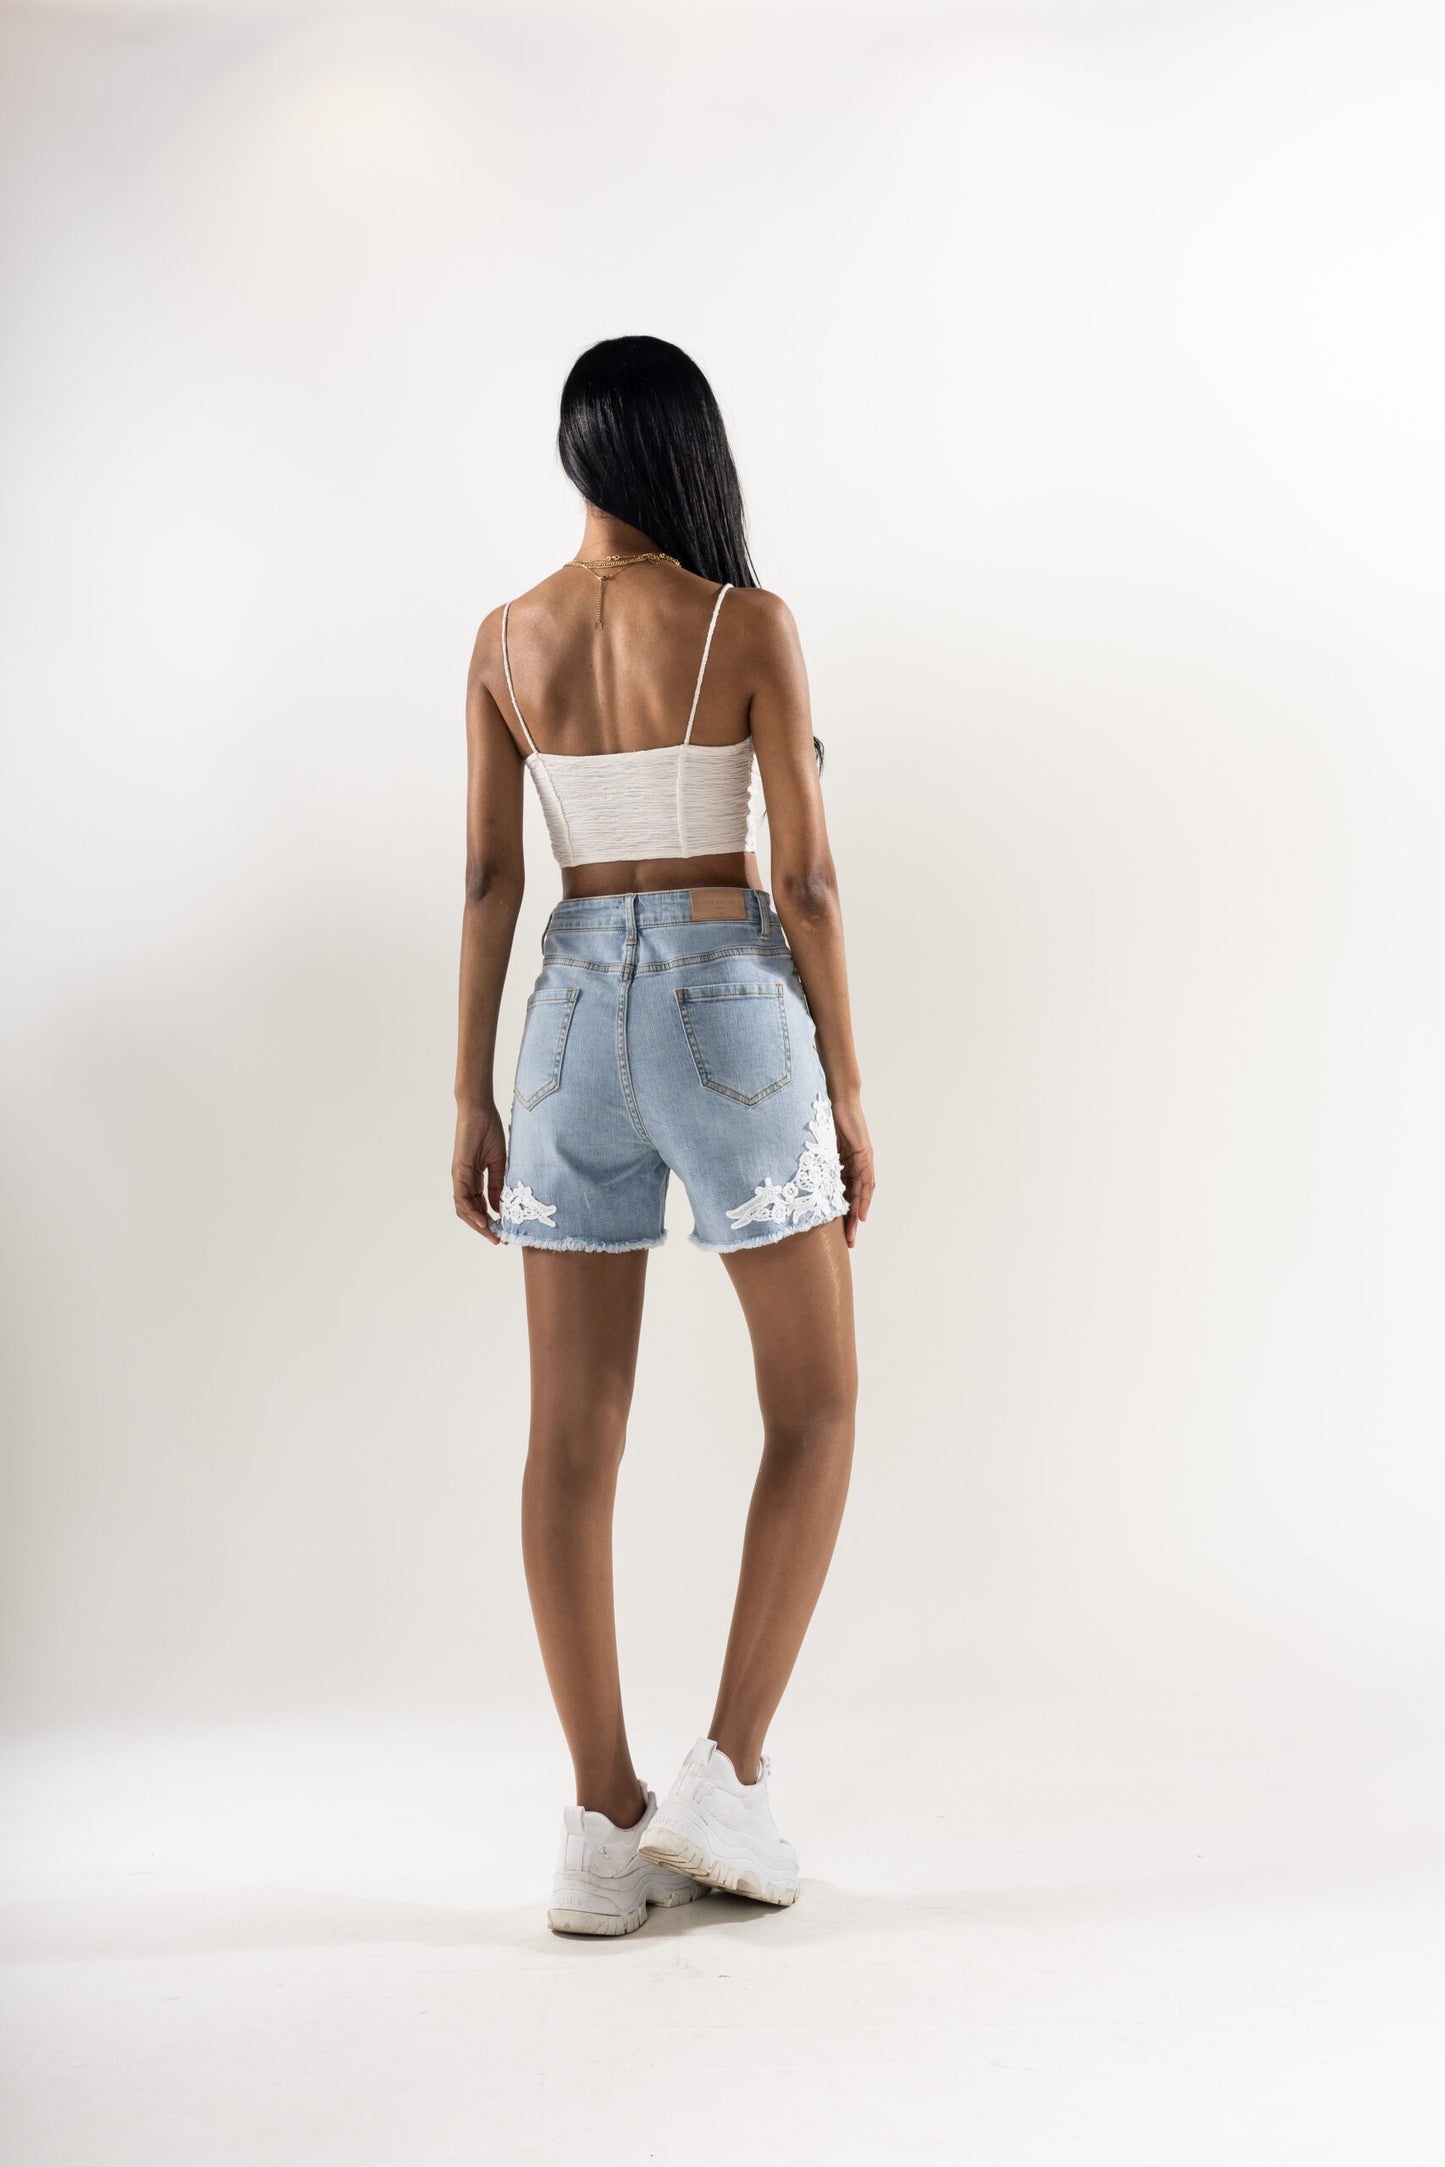 custom clothing manufacturers; high quality boutique wholesale clothing; denim wholesaler; boohoo suppliers list; wholesale womens clothing; manufacturing clothing uk; clothing vendors; wholesale clothing suppliers; buy clothes in bulk; fashion nova wholesale; wholesale clothing online; bulk clothing for sale; british clothing manufacturer; wholesale fashion